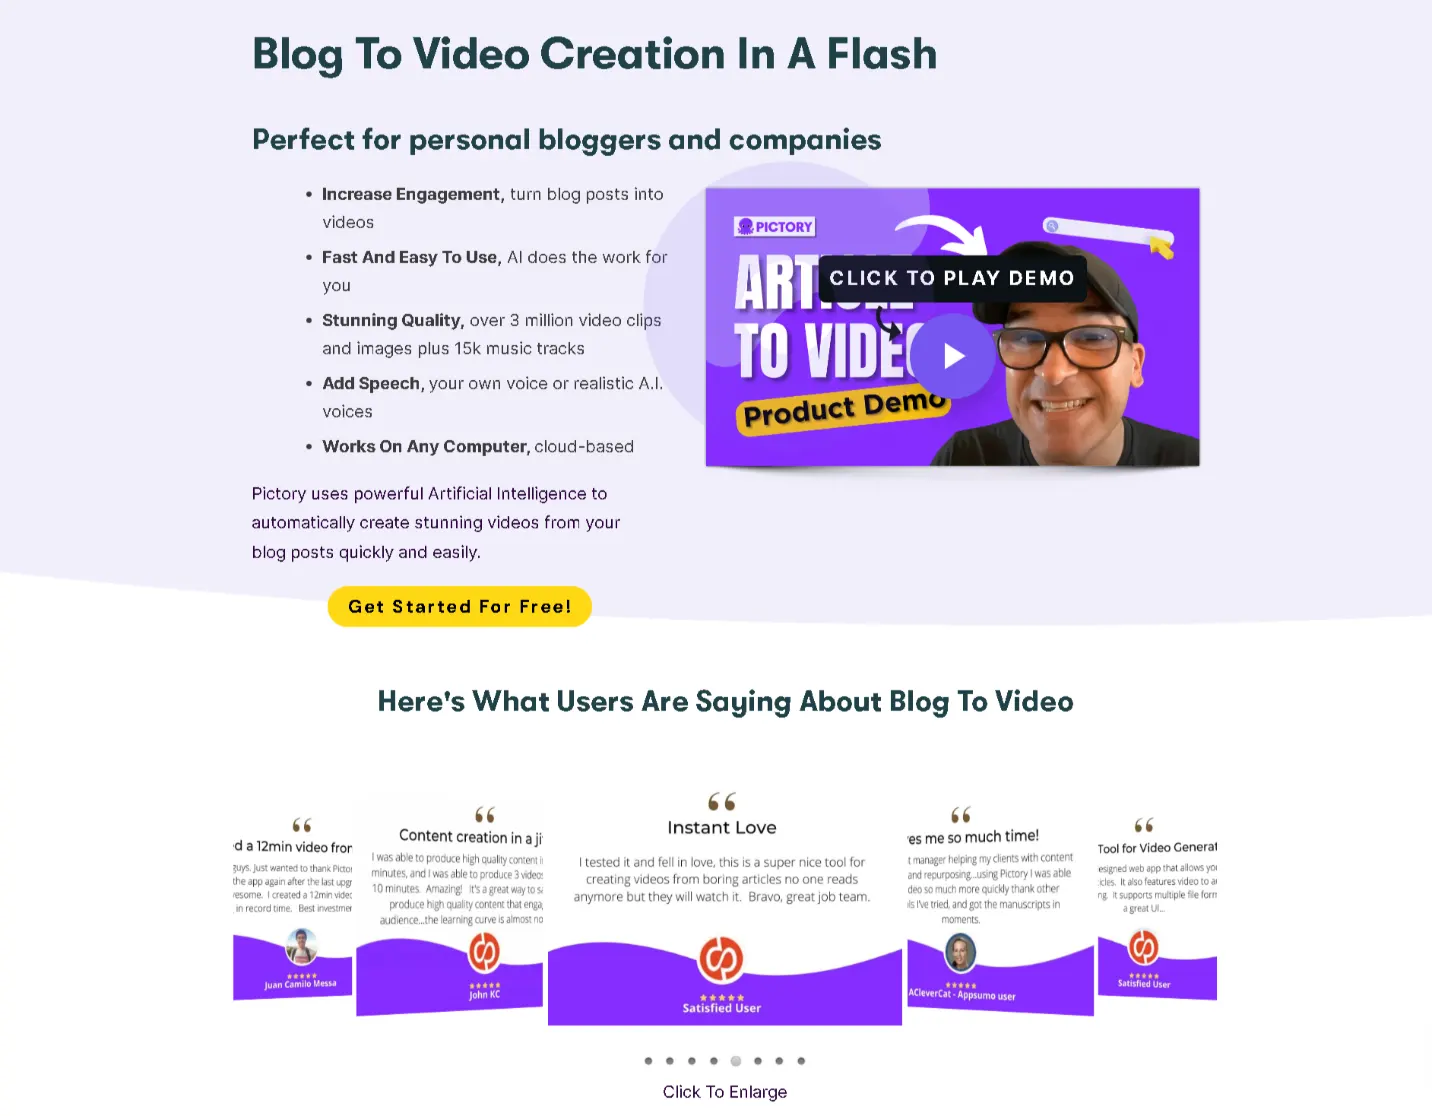 Blog-To-Video-Creation-In-A-Flash-with-Pictory-ai